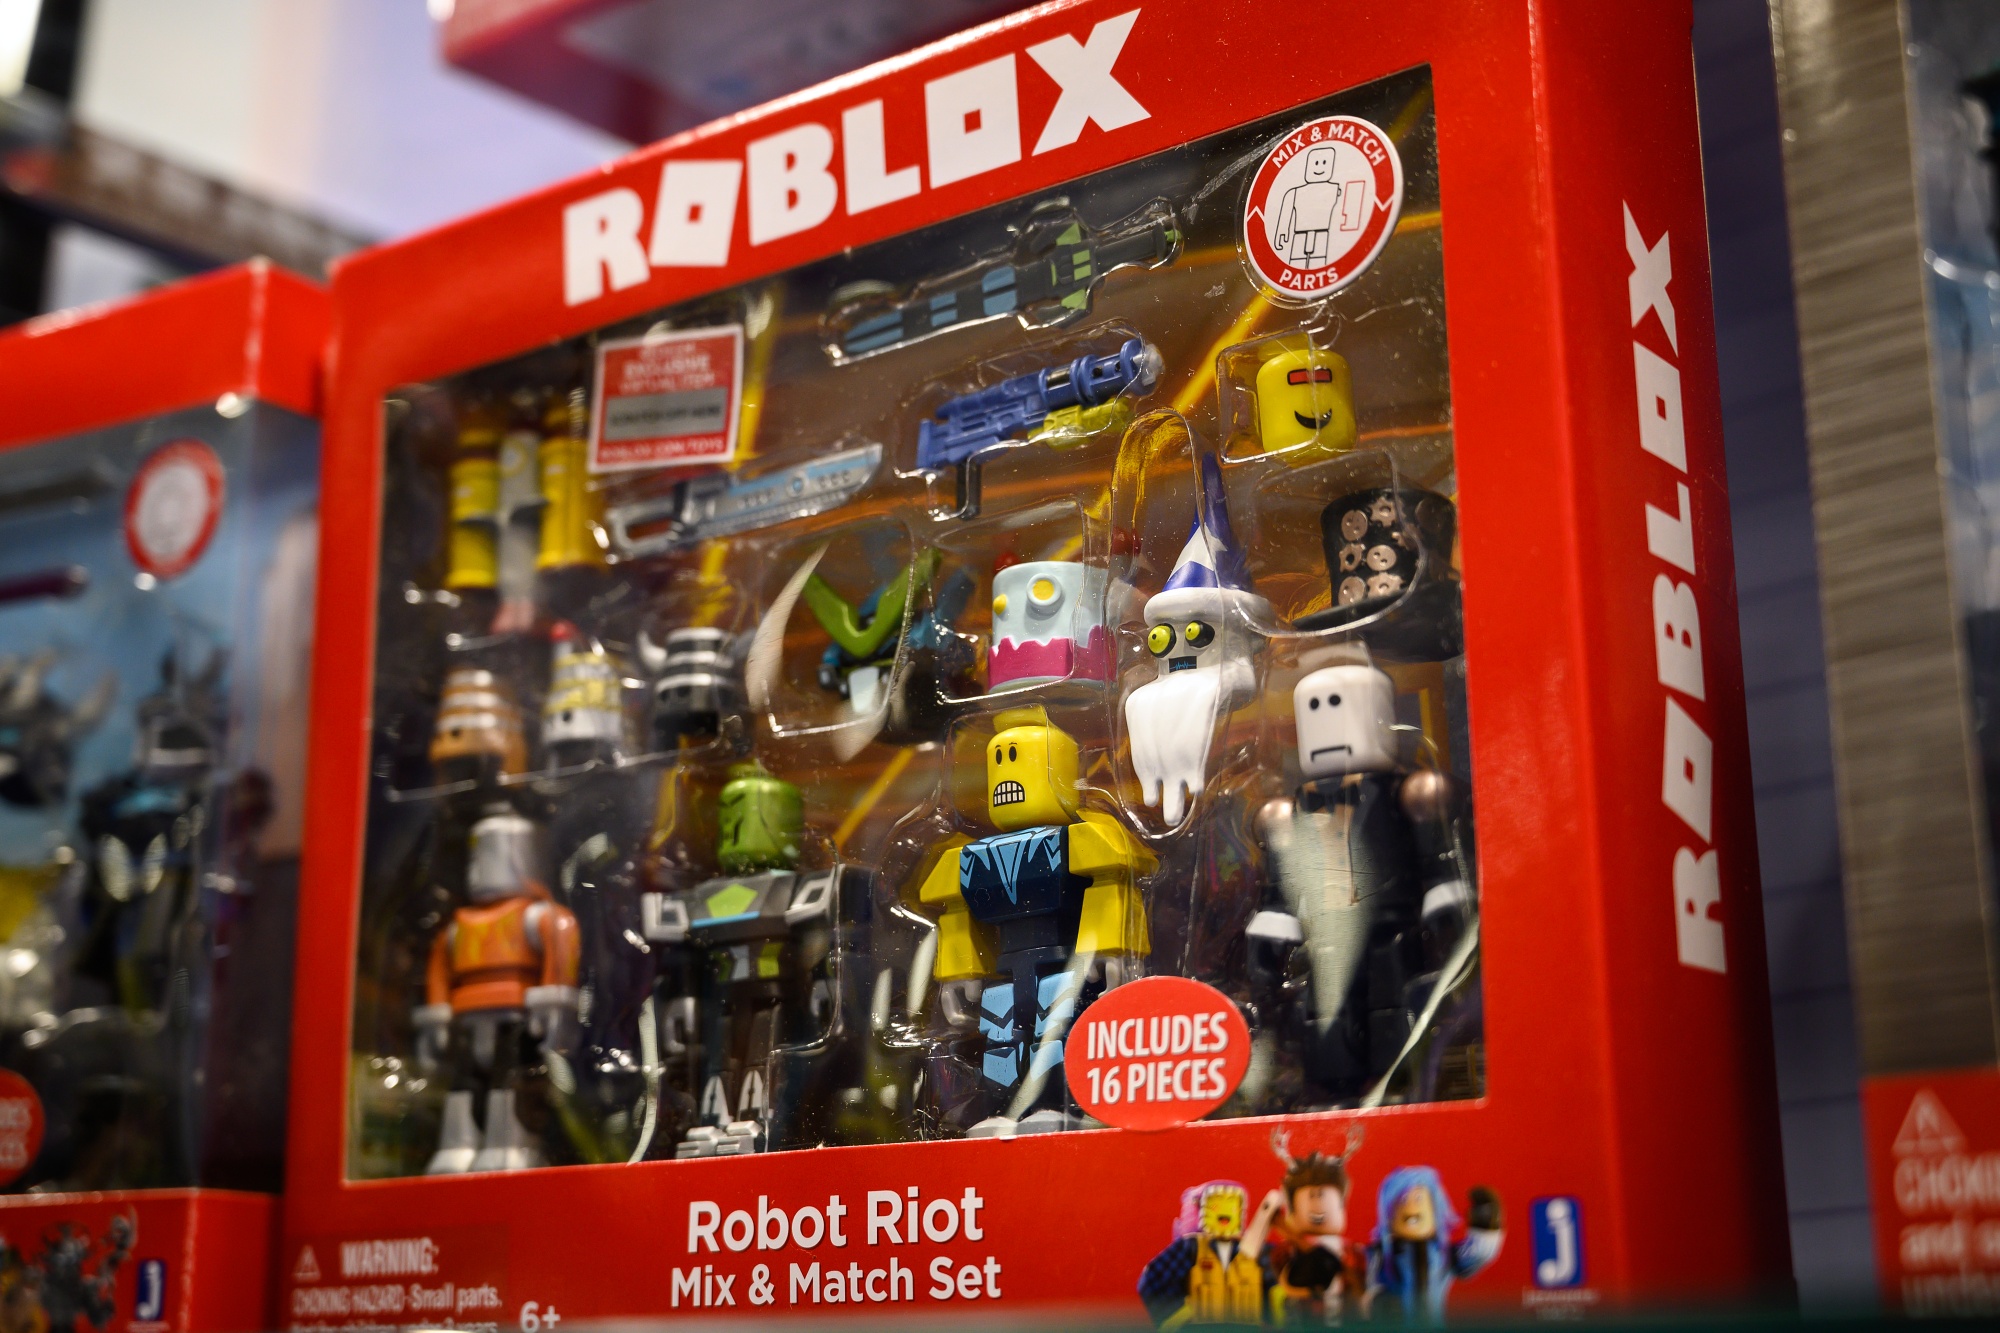 Roblox: The Free Videogame Platform That Became a $45 Billion